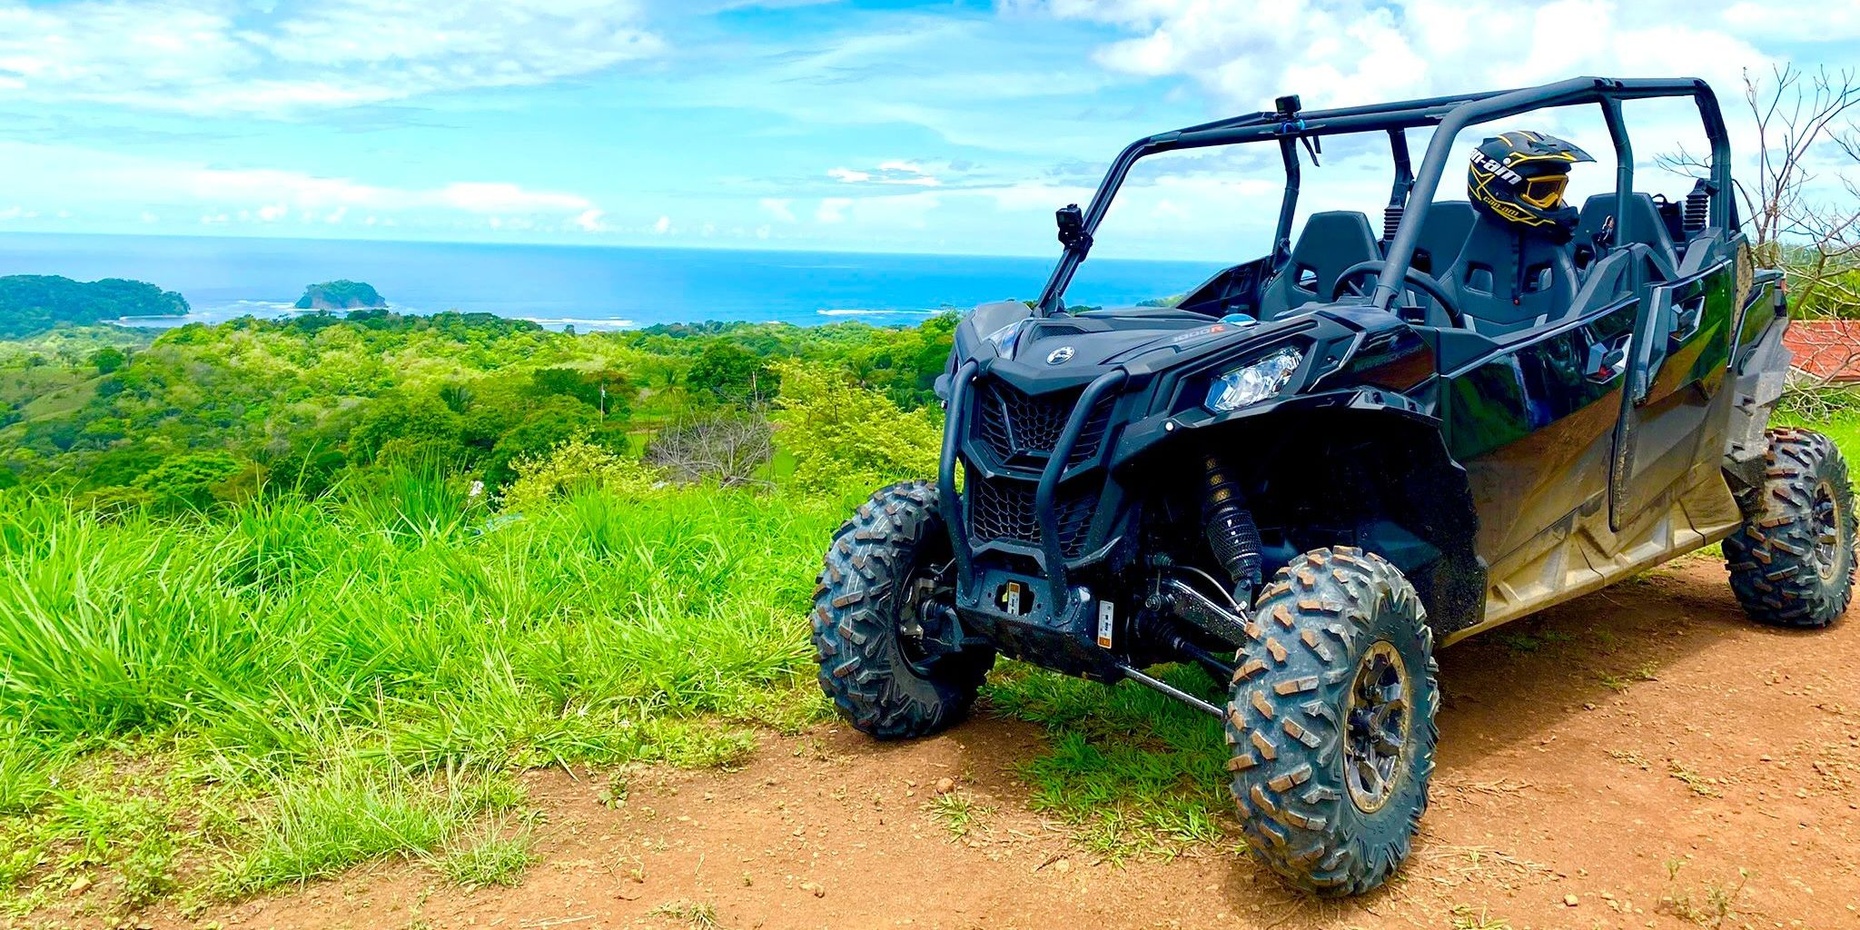 Sunset & Jungle Combo ATV Side-by-Side Tour in Costa Rica